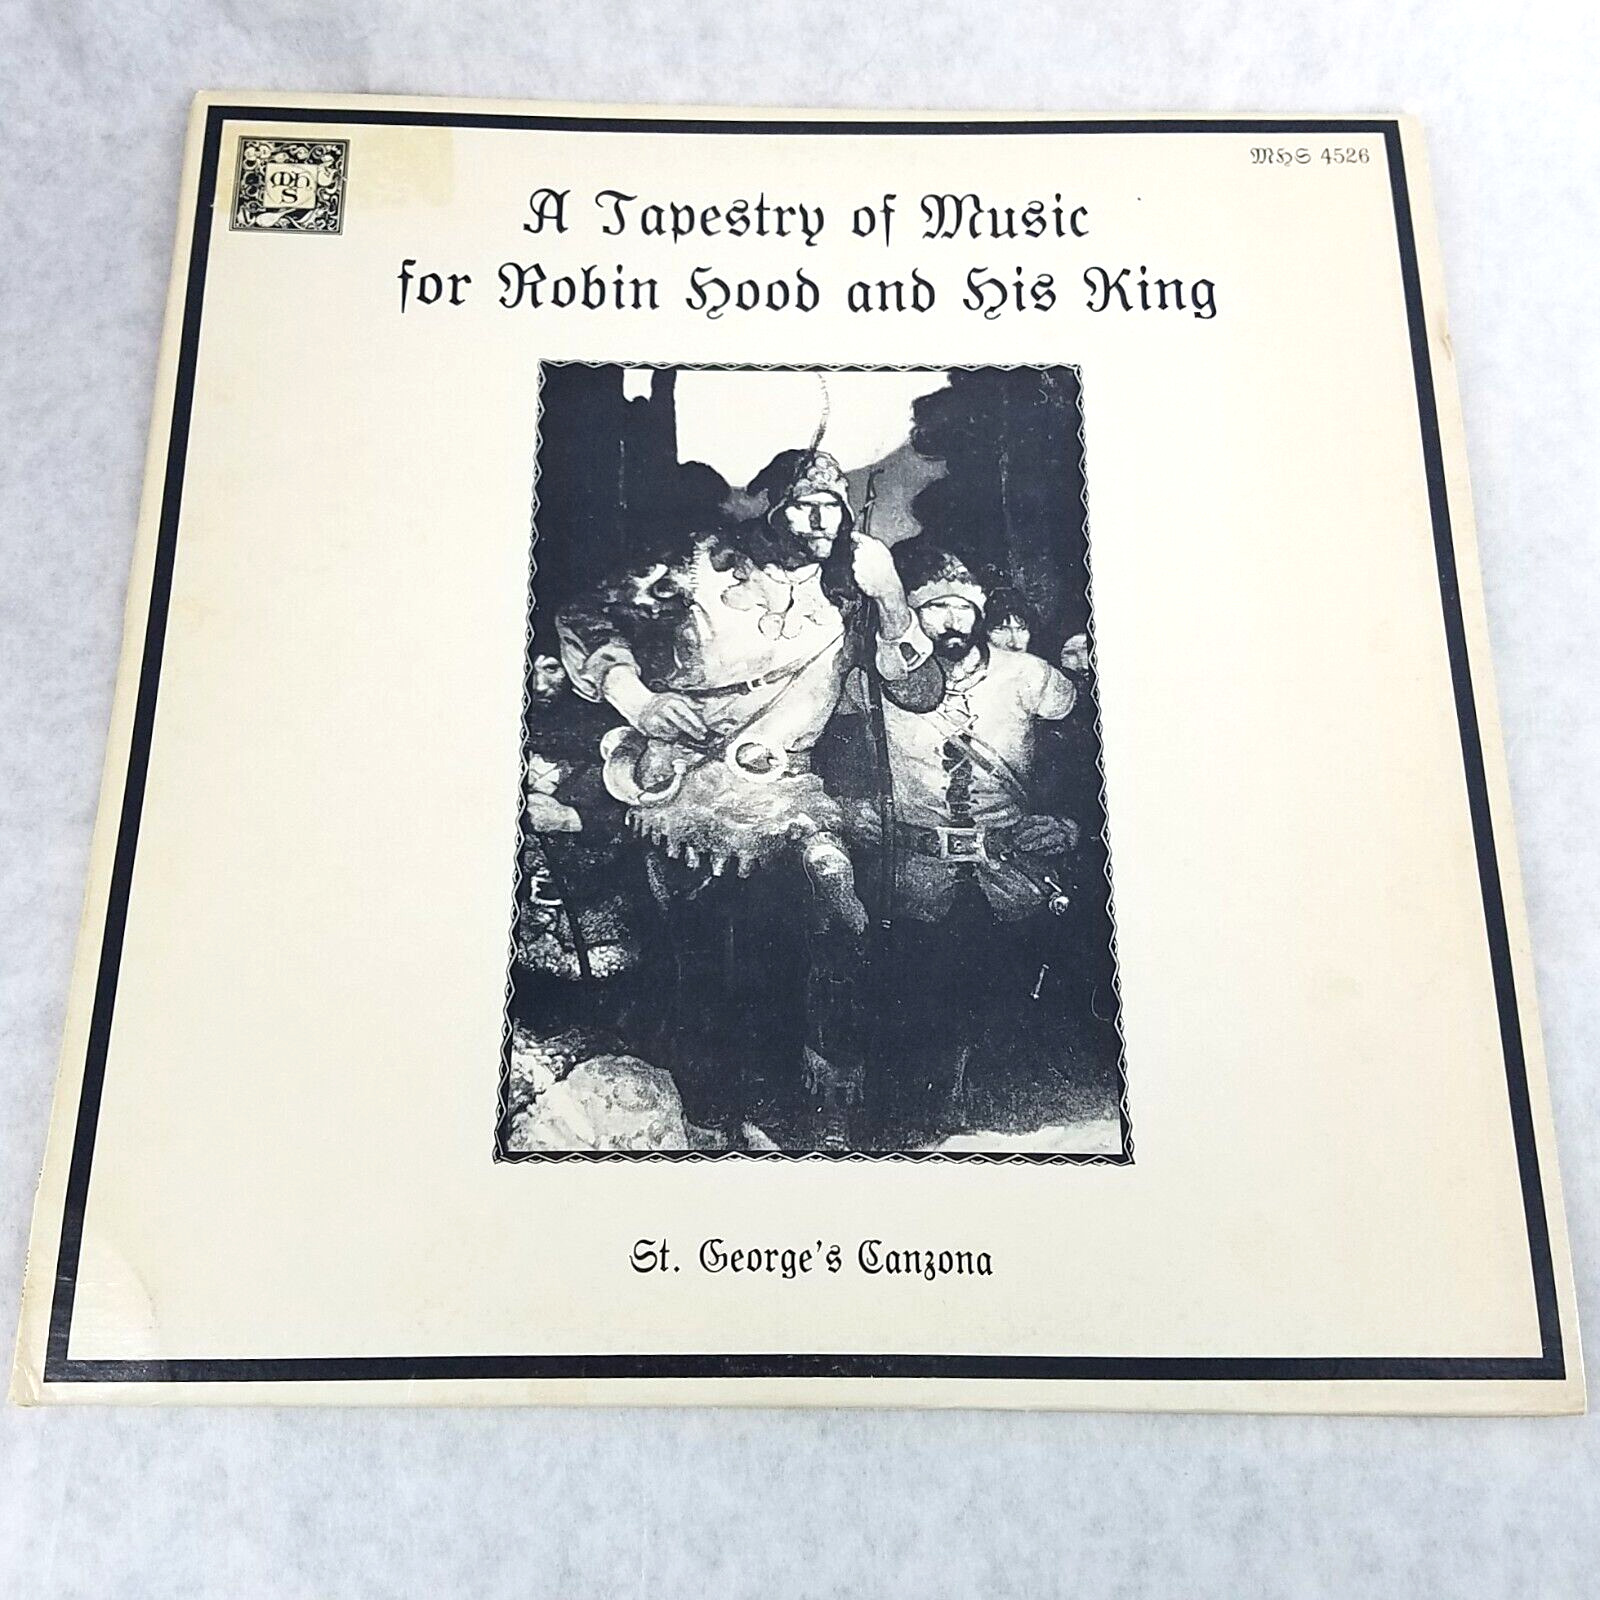 A Tapestry of Music for Robin Hood and His King - St. George's Canzona LP Record